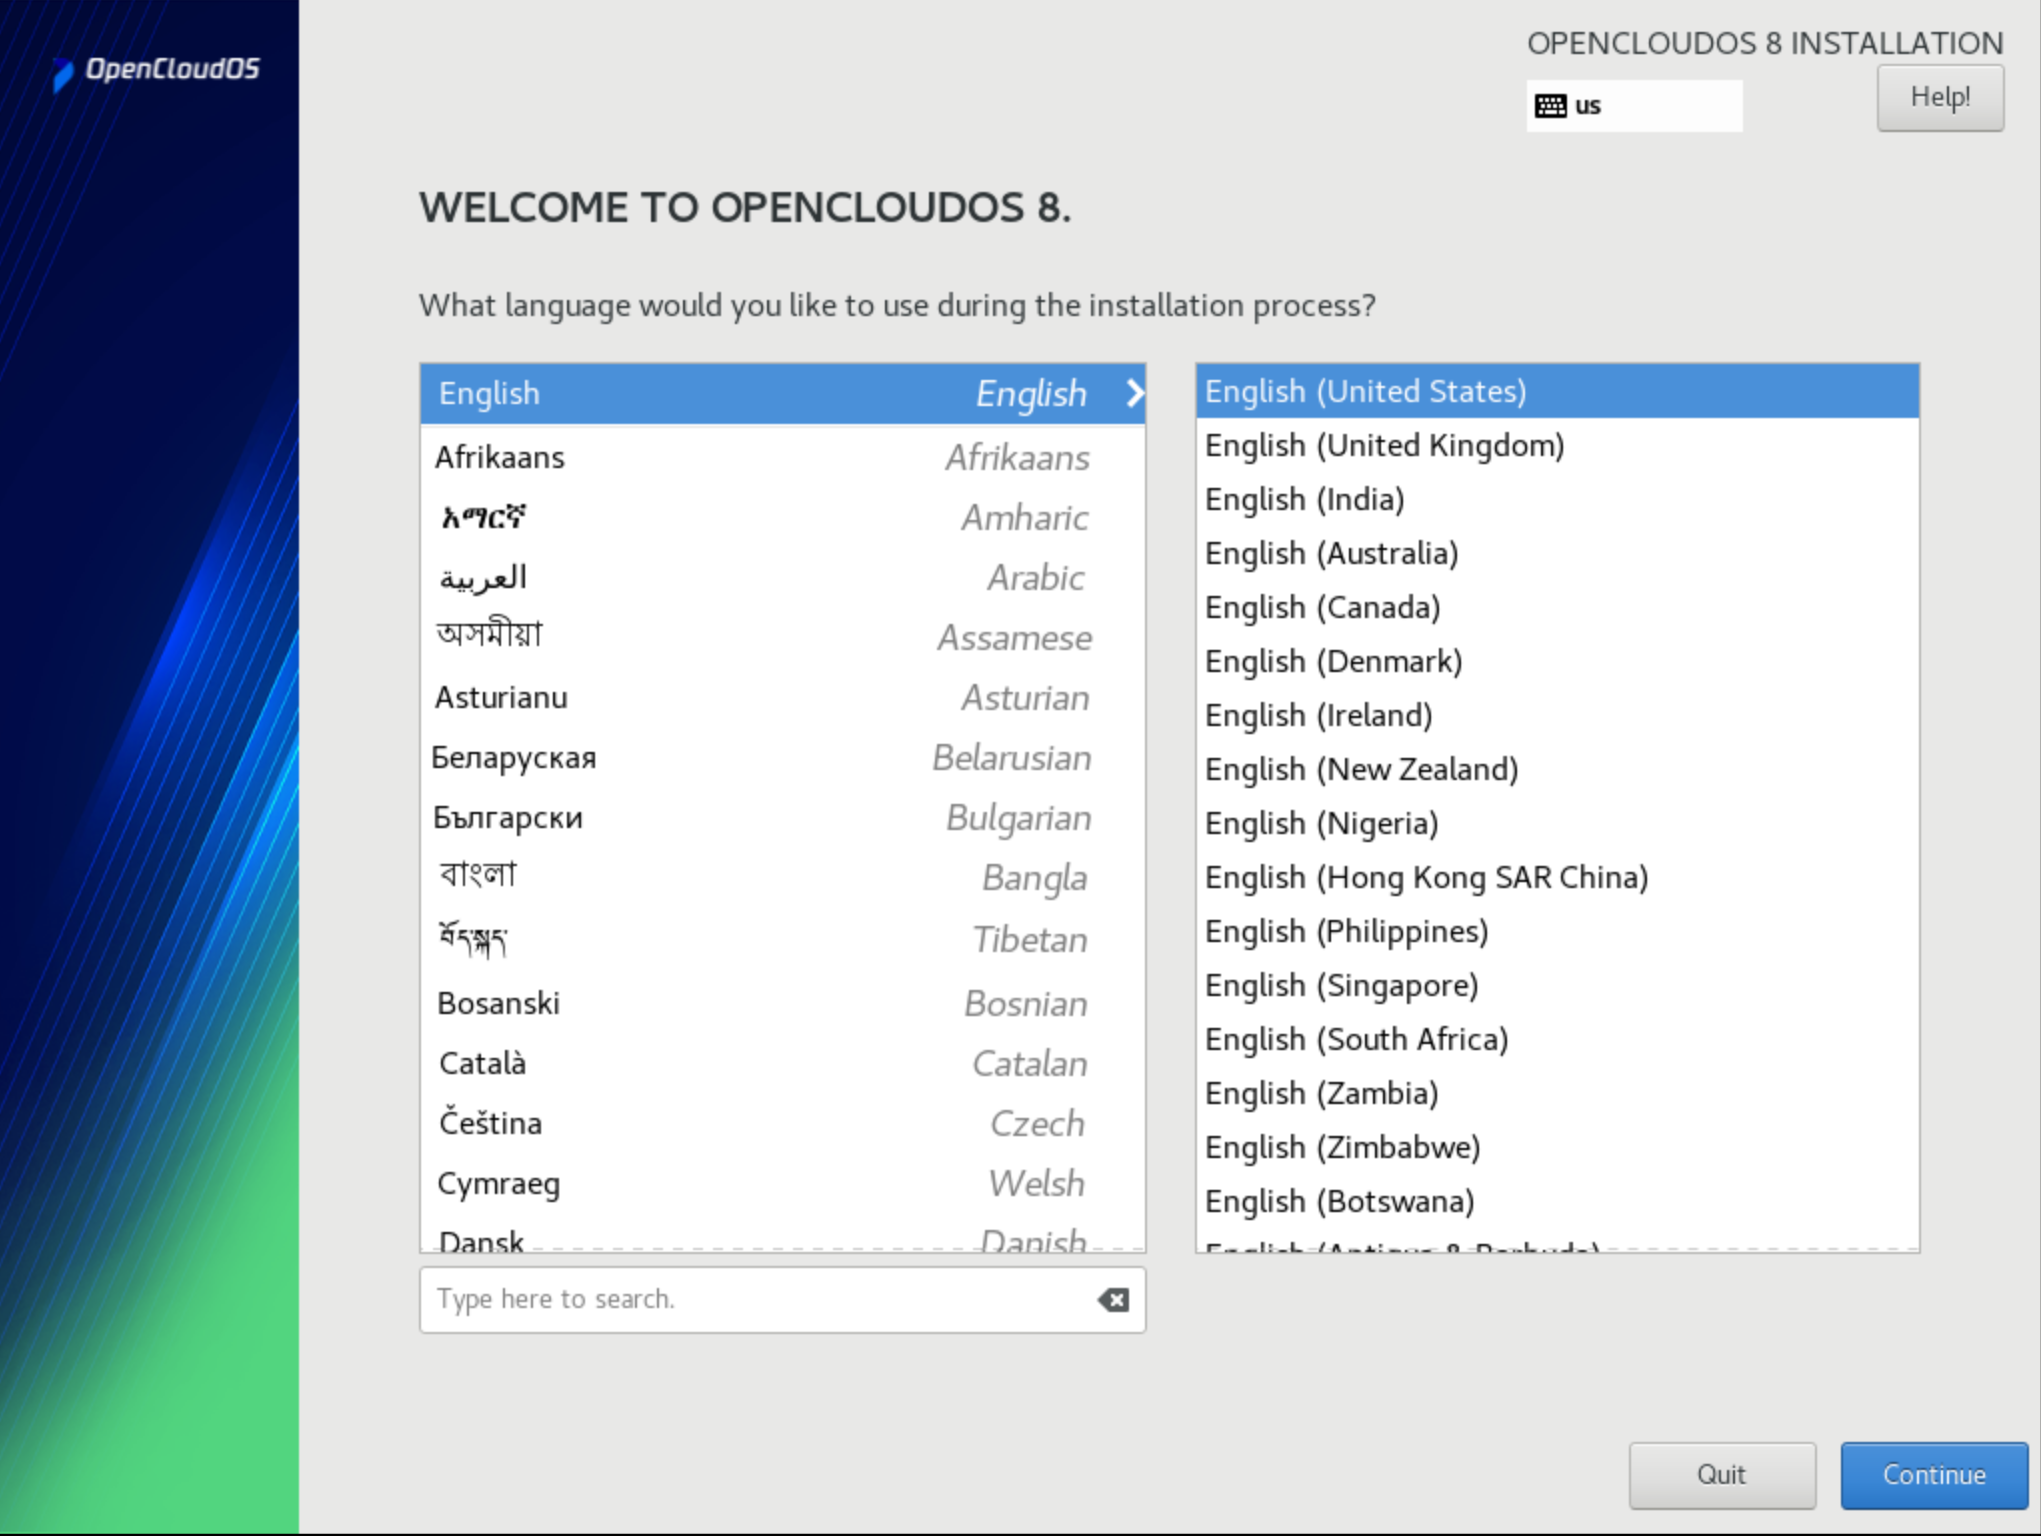 OpenCloudOS V8 language selection example picture